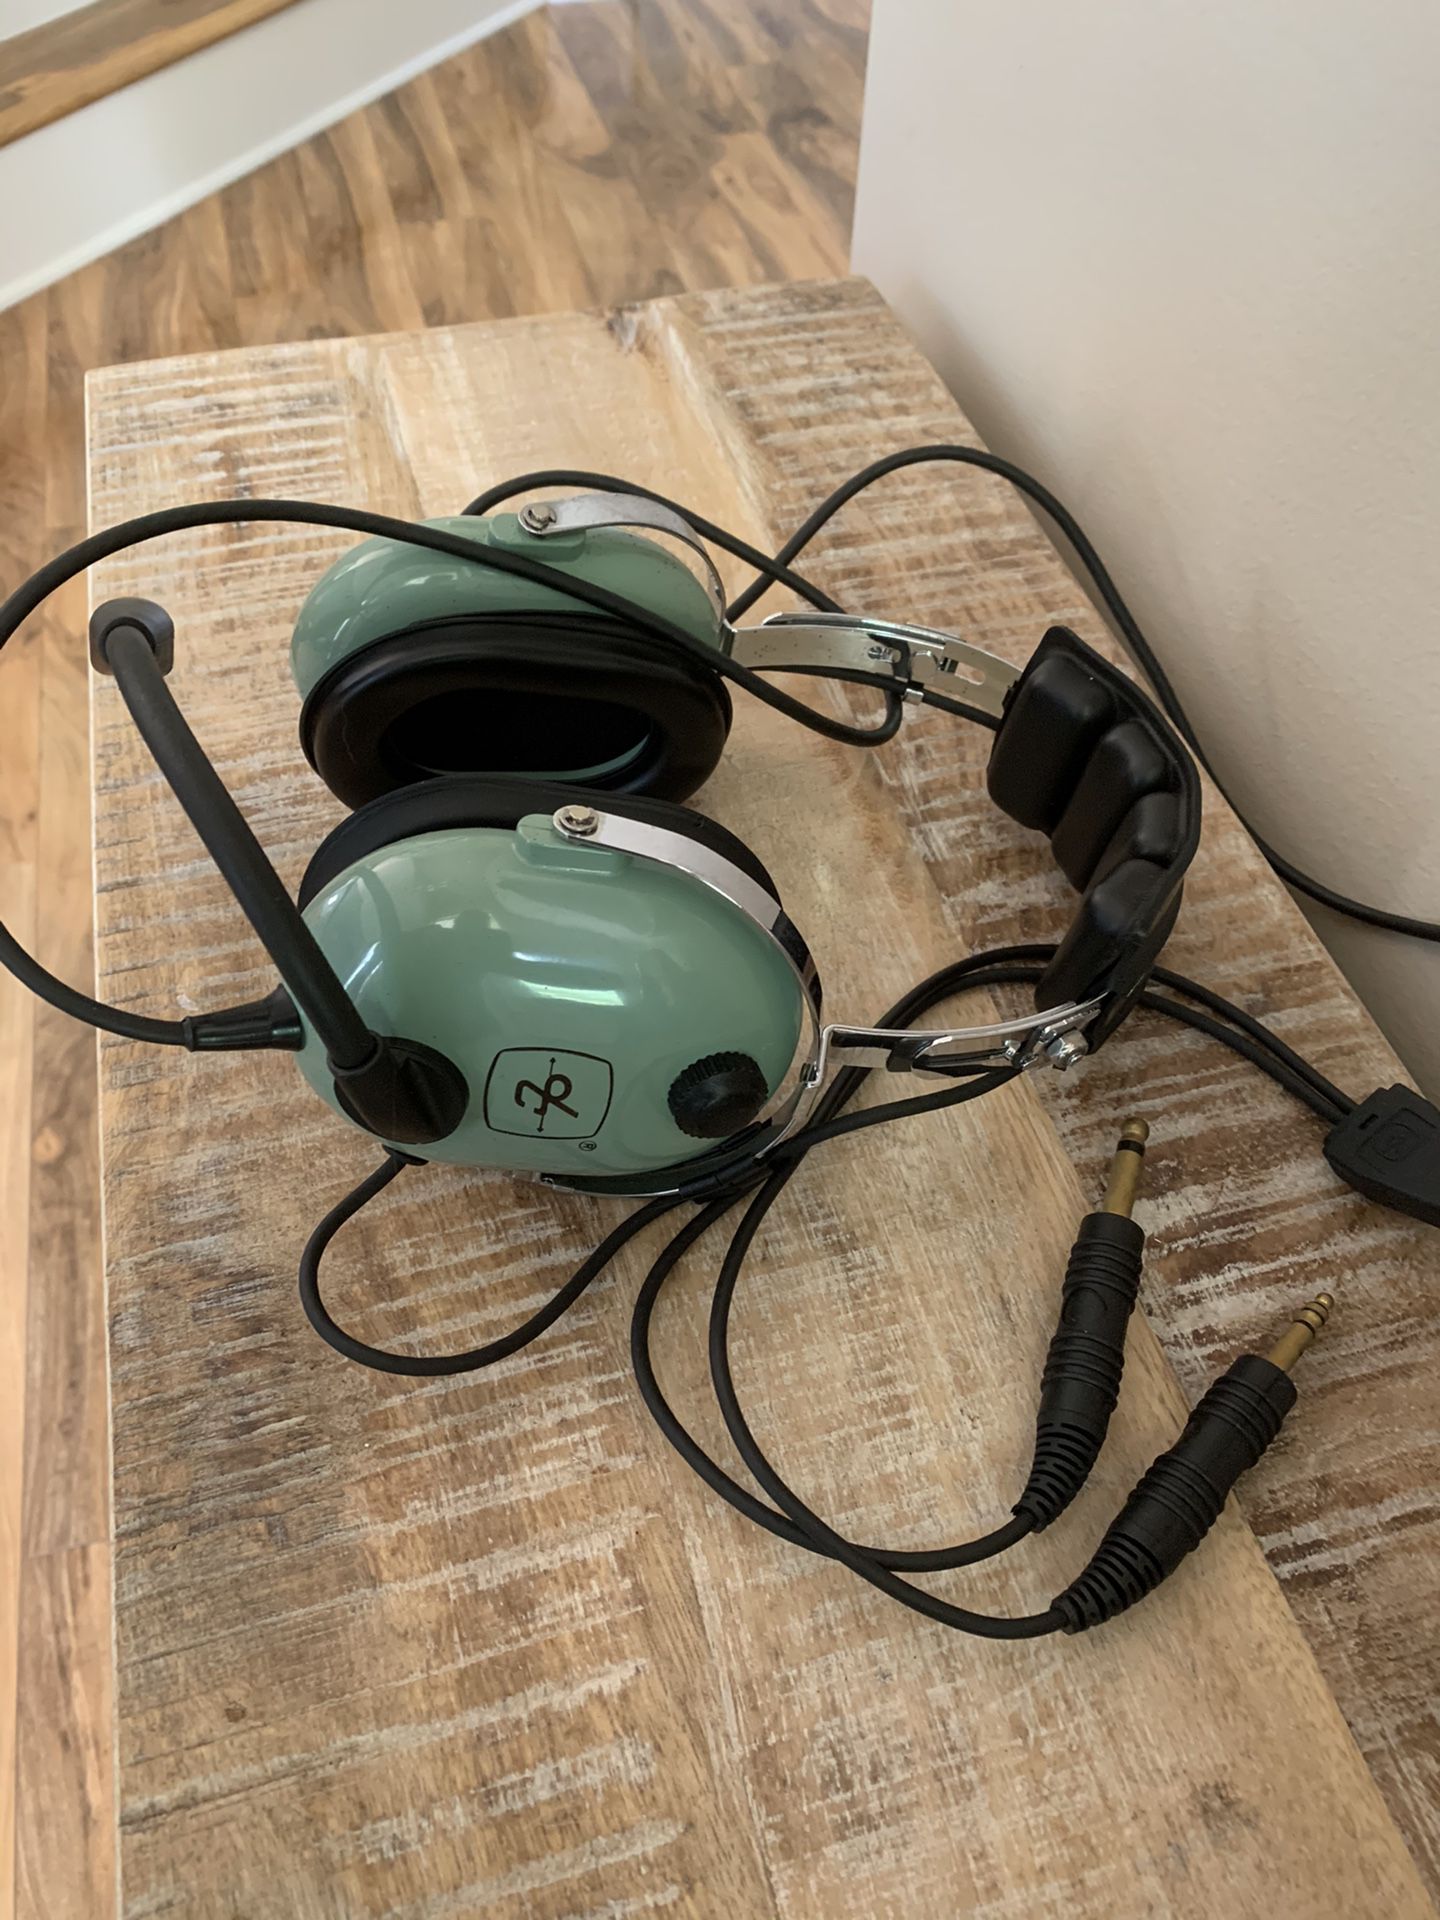 David Clark’s H10-20 Aviation Headset with advance noise cancellation